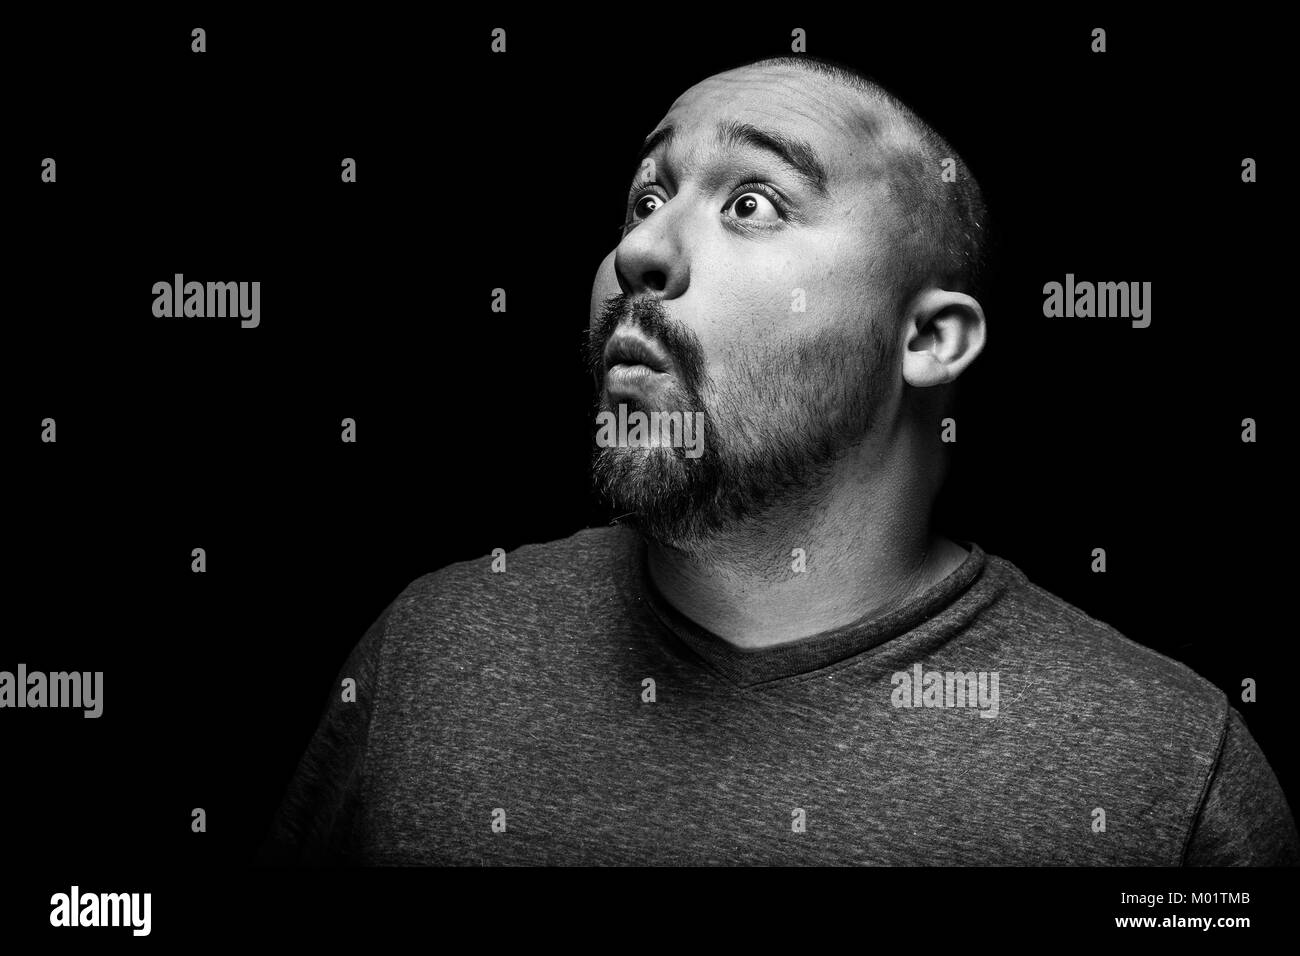 A high contrast black and white emotional and surprised portrait of a hispanic man. Stock Photo